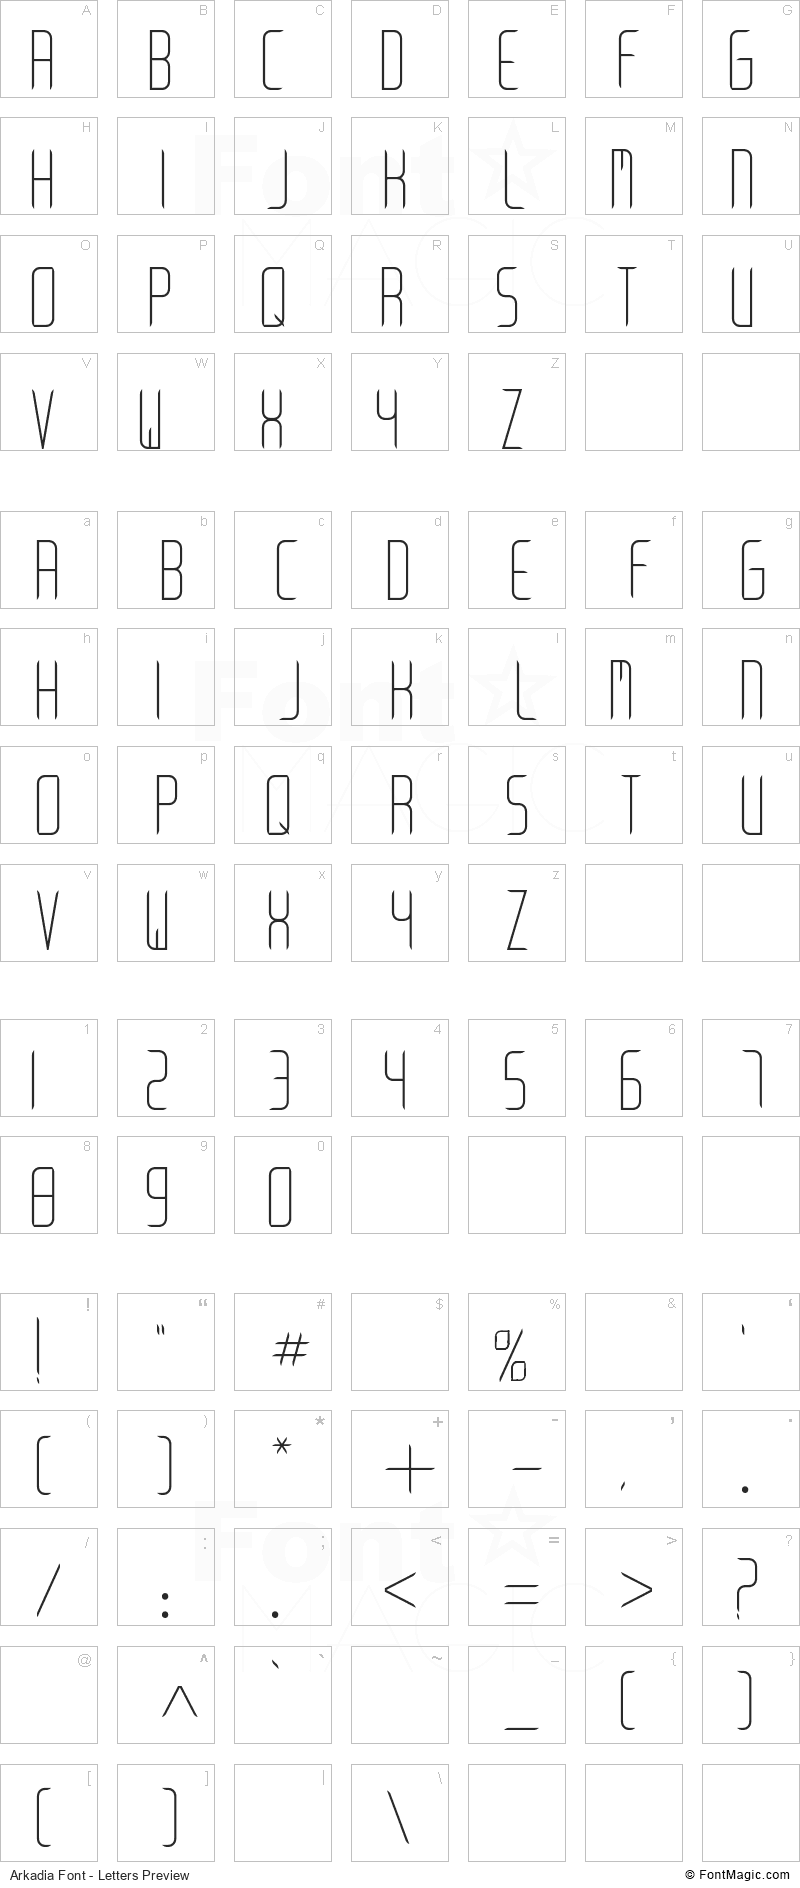 Arkadia Font - All Latters Preview Chart